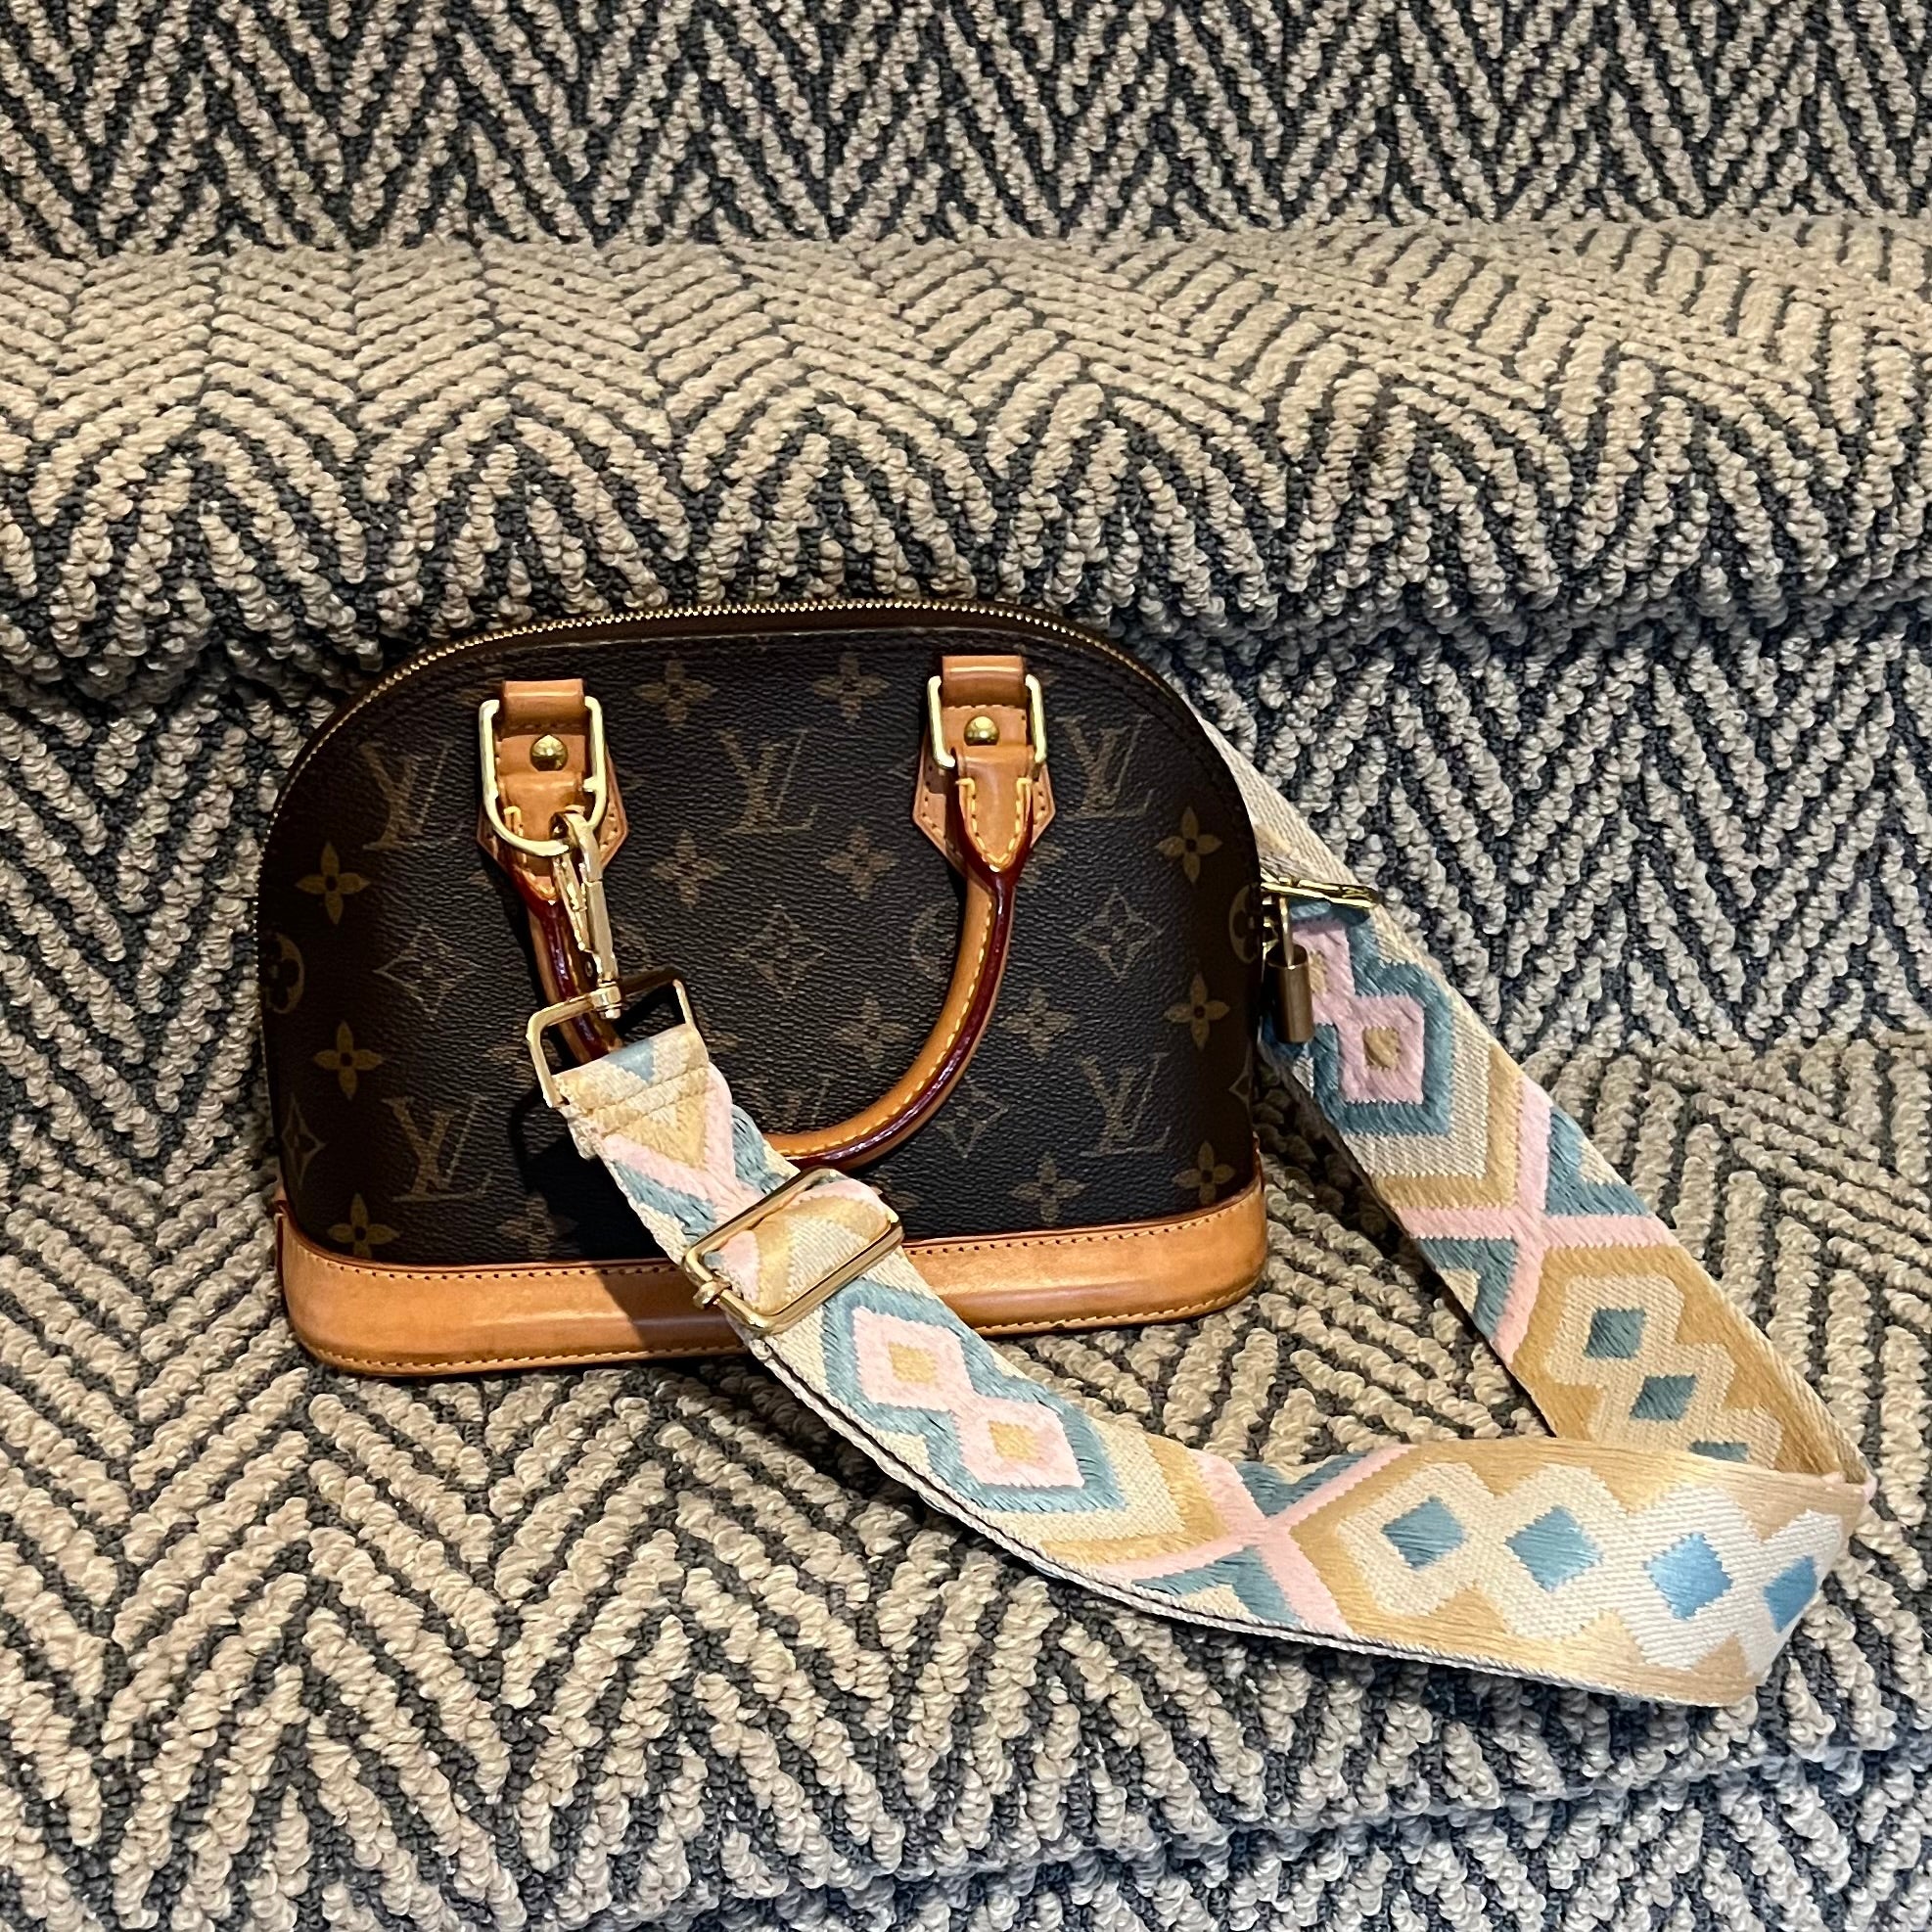 Embroidered Crossbody Bag Straps (3 Color Options)